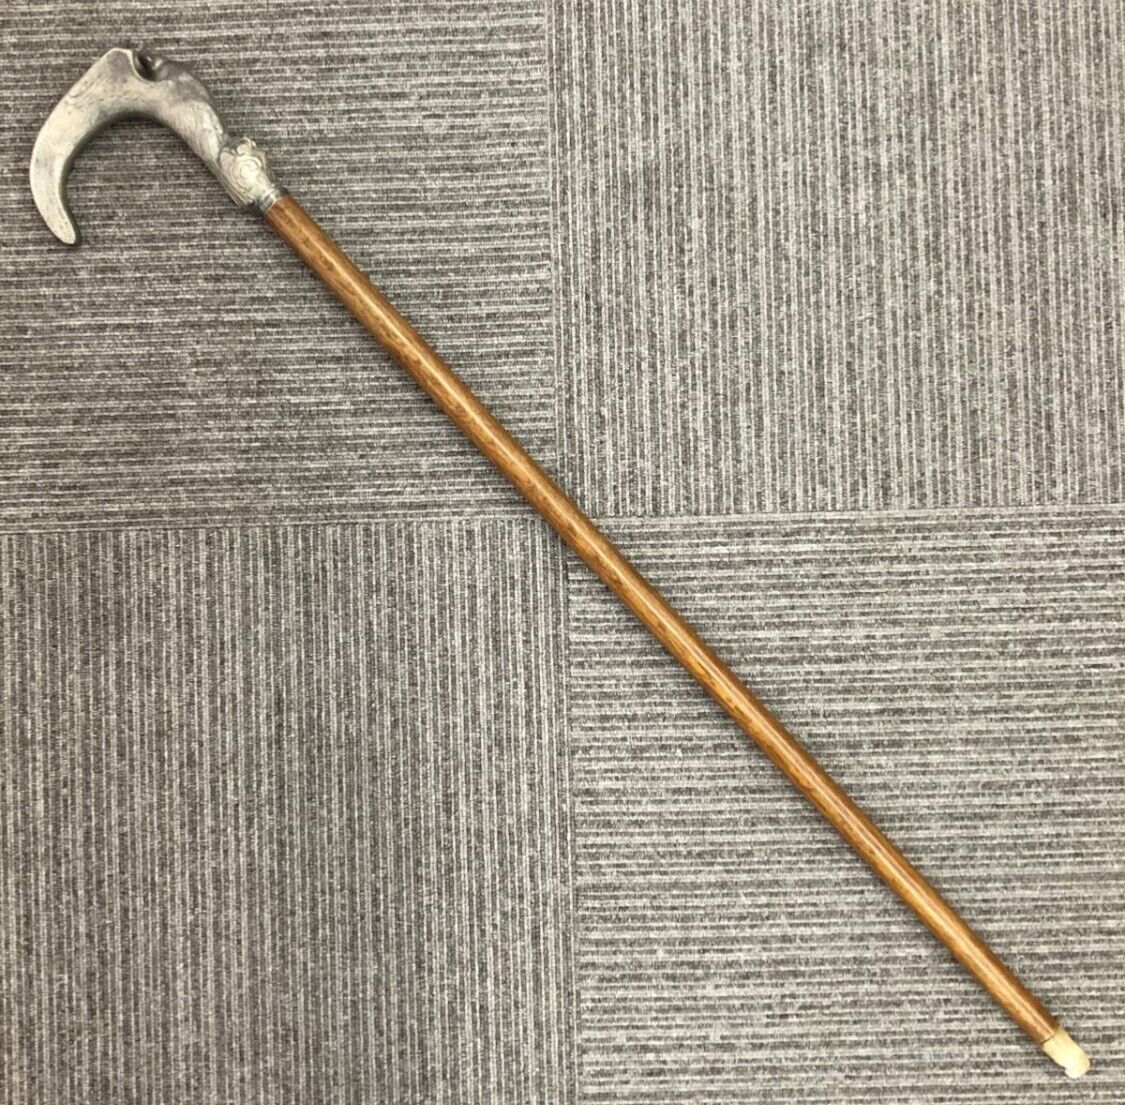 World War II Imperial Japanese Army Honor Cane for Wounded Soldiers